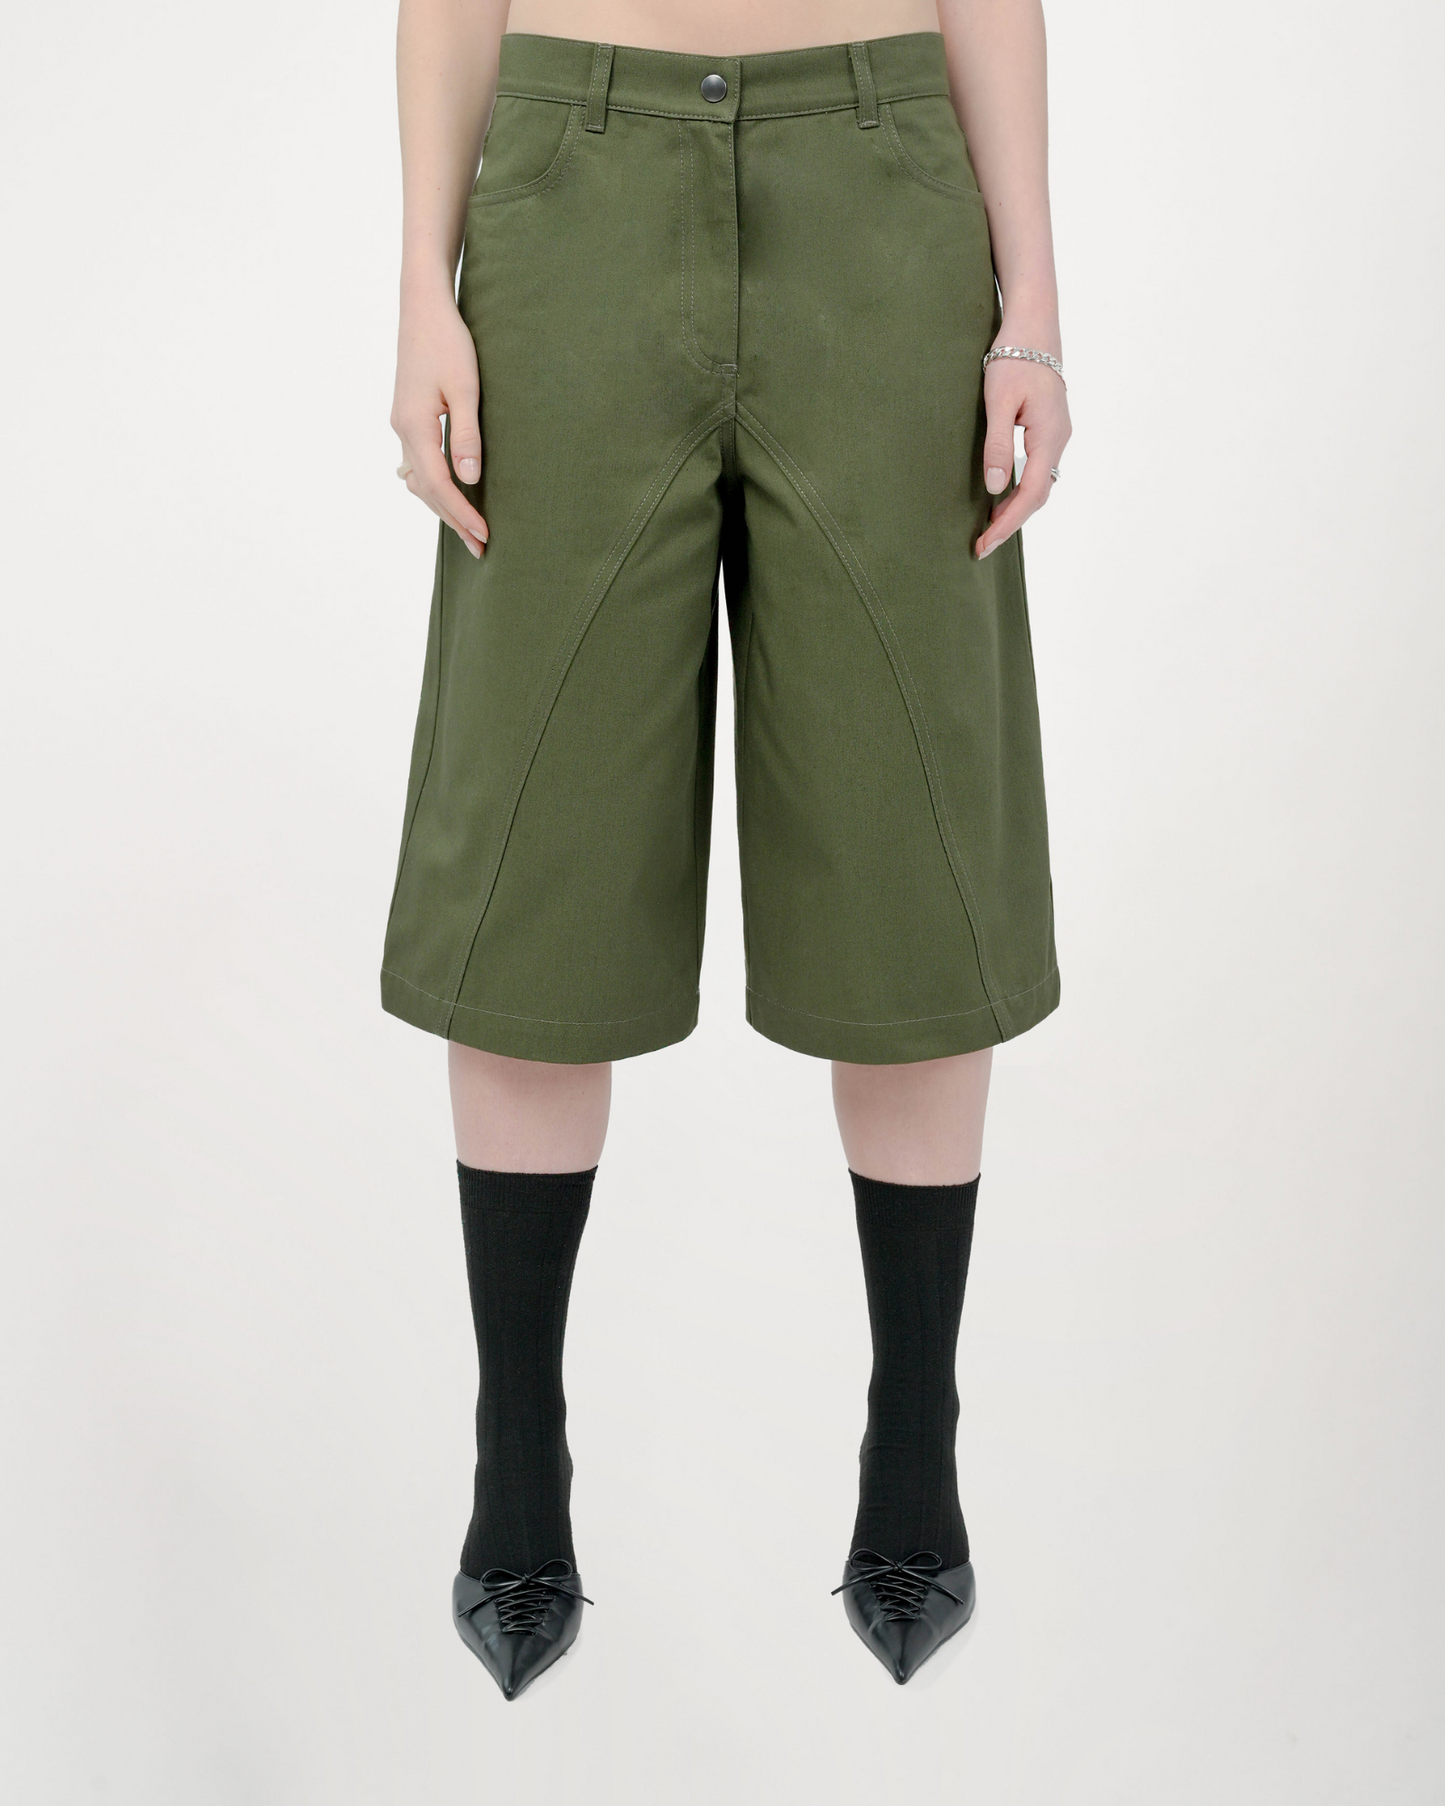 Model is wearing size Small in the Tommi Short in Olive Green by Aseye Studio